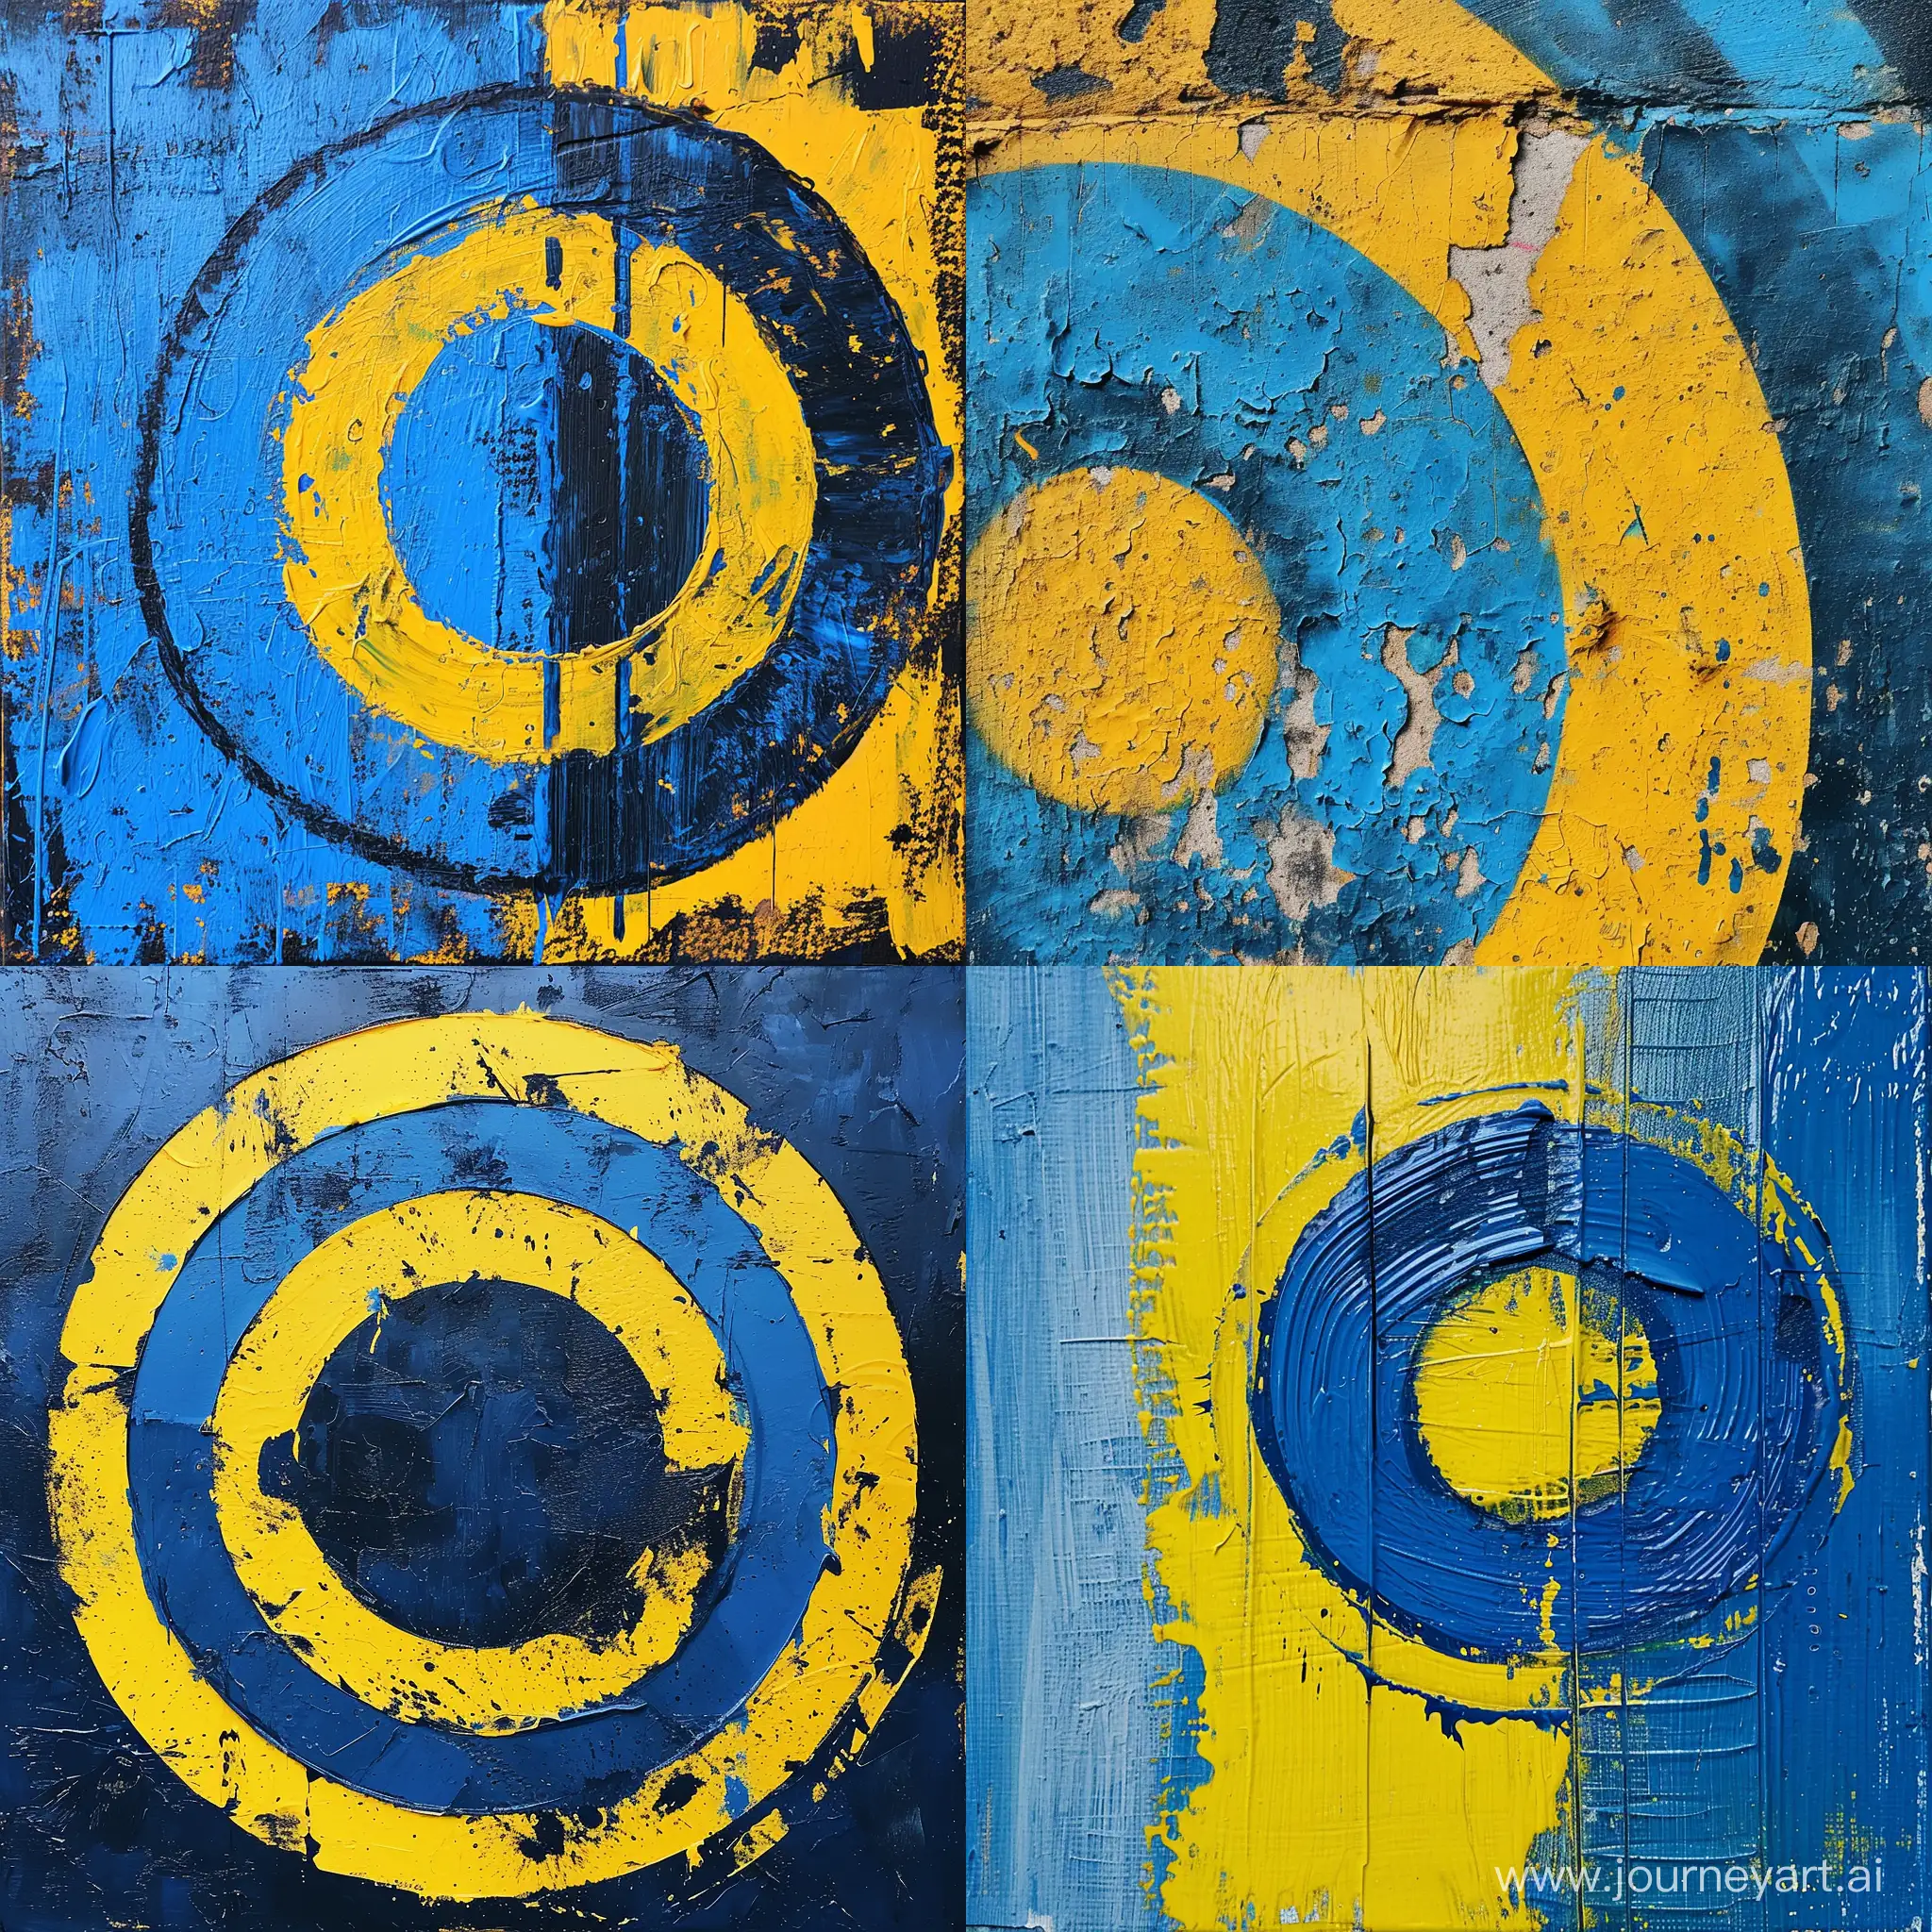 Vibrant-Abstract-Art-with-Blue-and-Yellow-Paint-Graffiti-Focus-Target